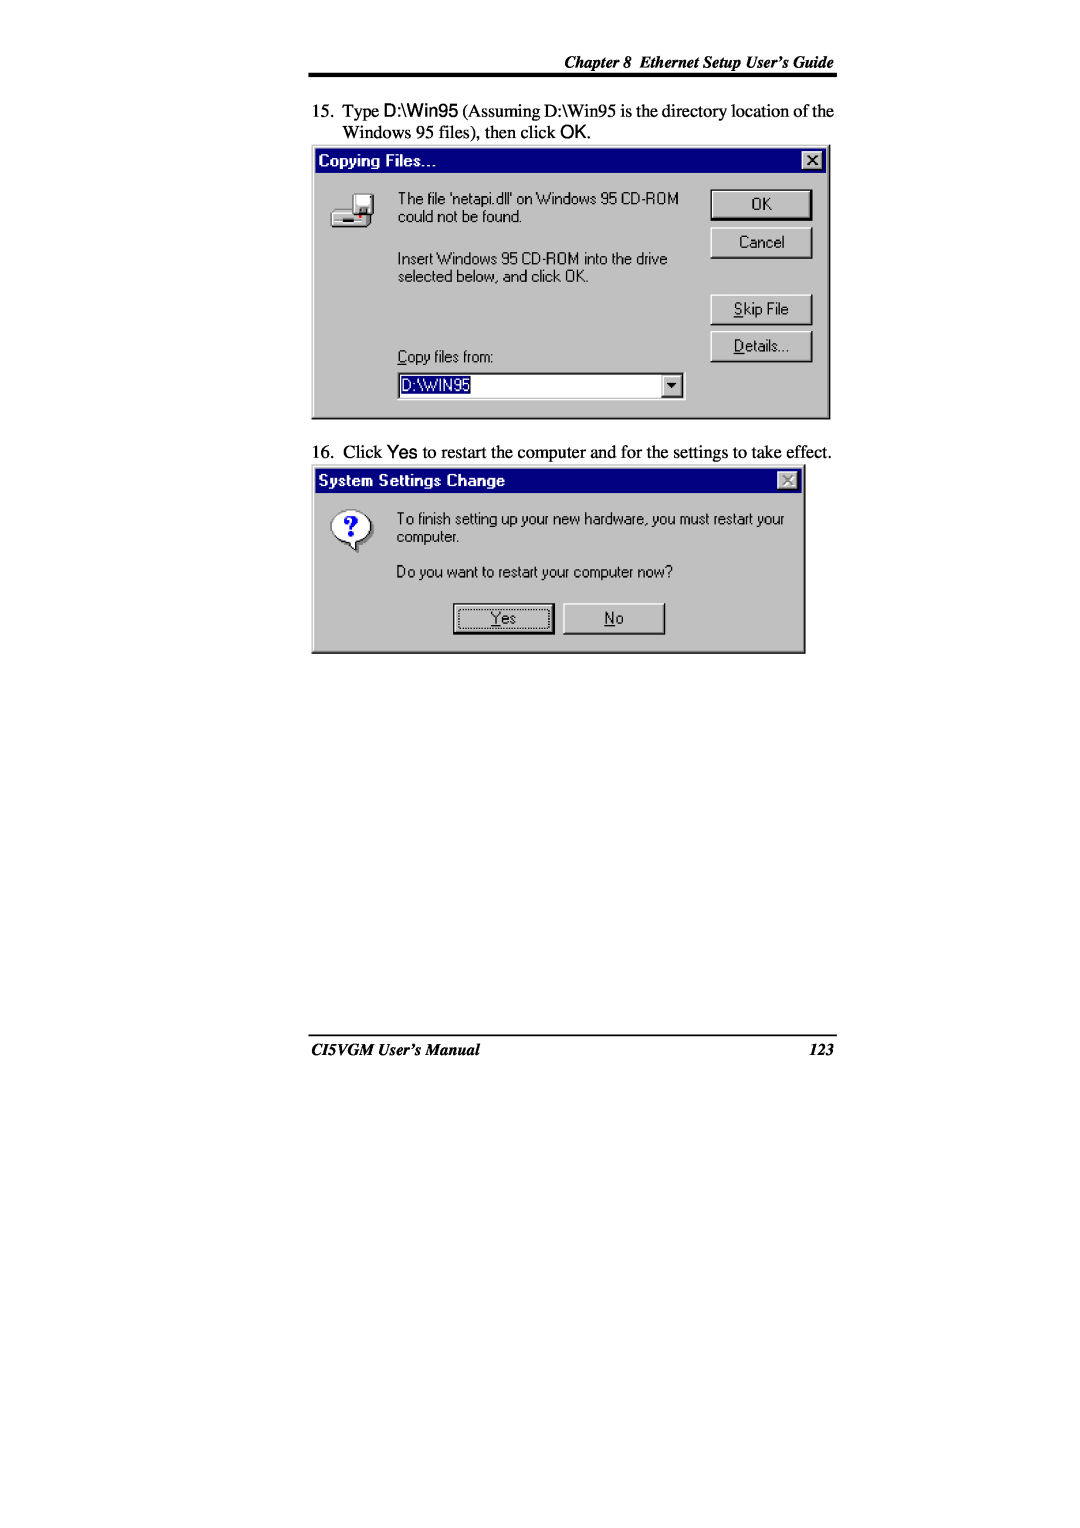 IBM CI5VGM Series Type D\Win95 Assuming D\Win95 is the directory location of the Windows 95 files, then click OK 